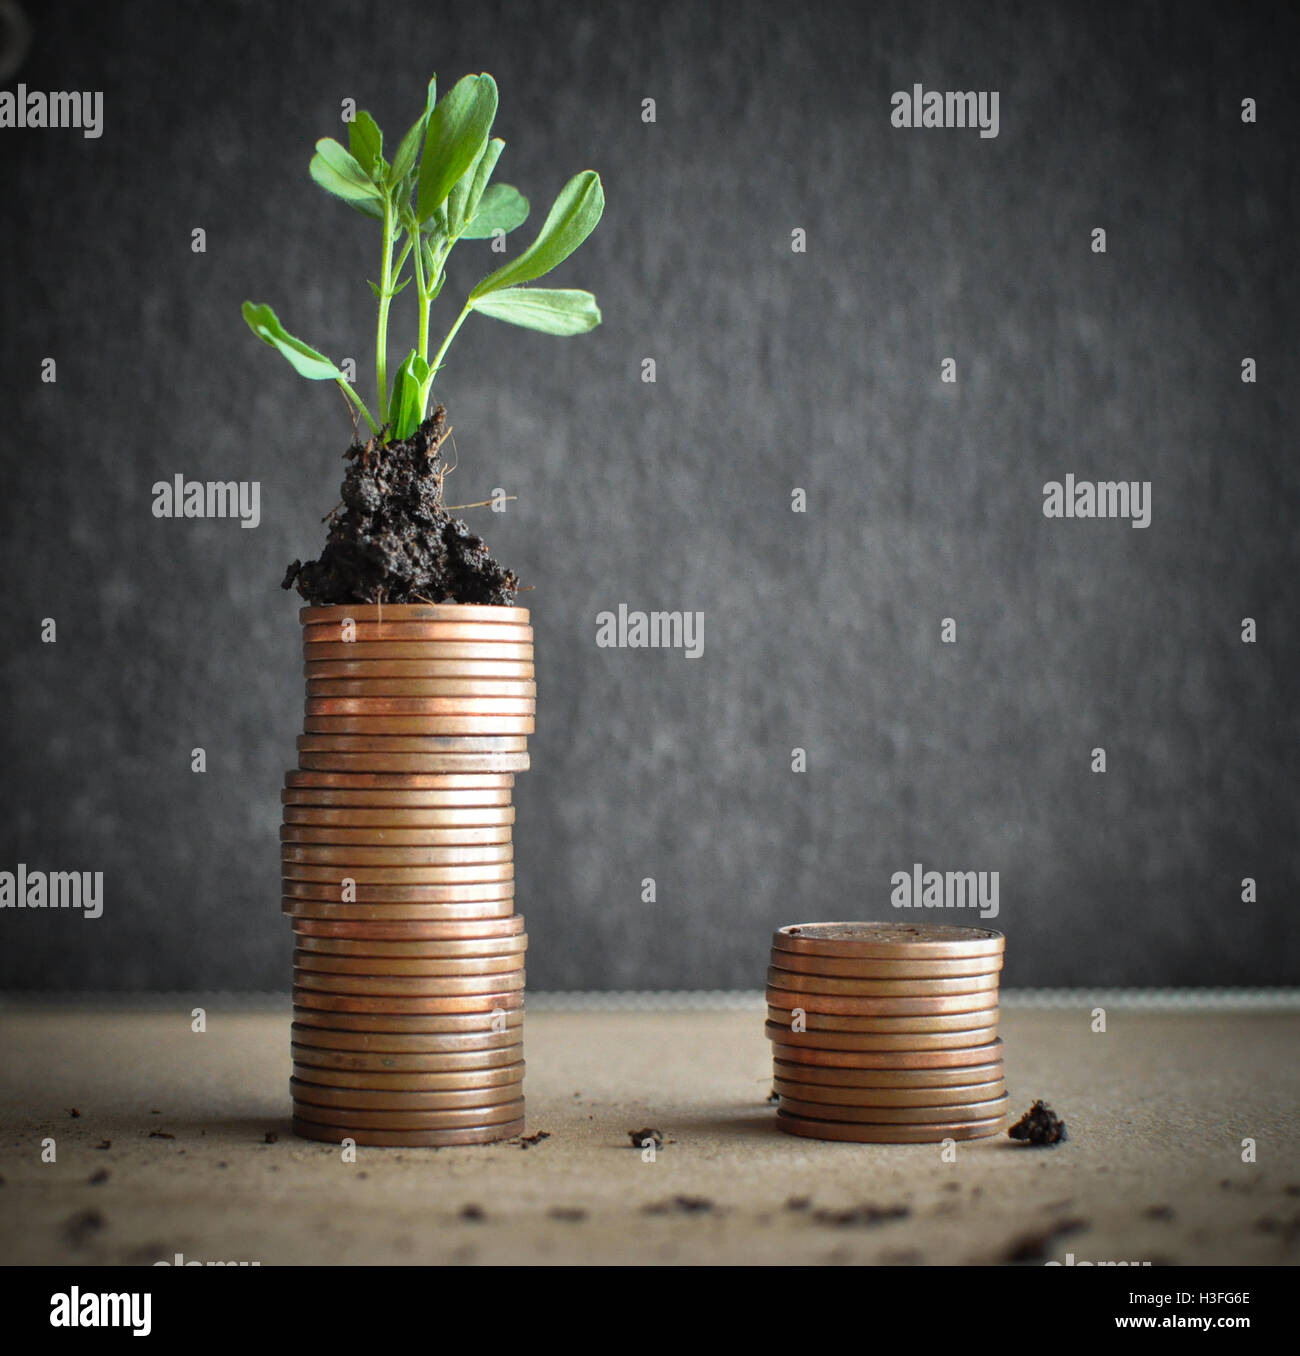 Coins with young plants in soil. Money growth concept Stock Photo